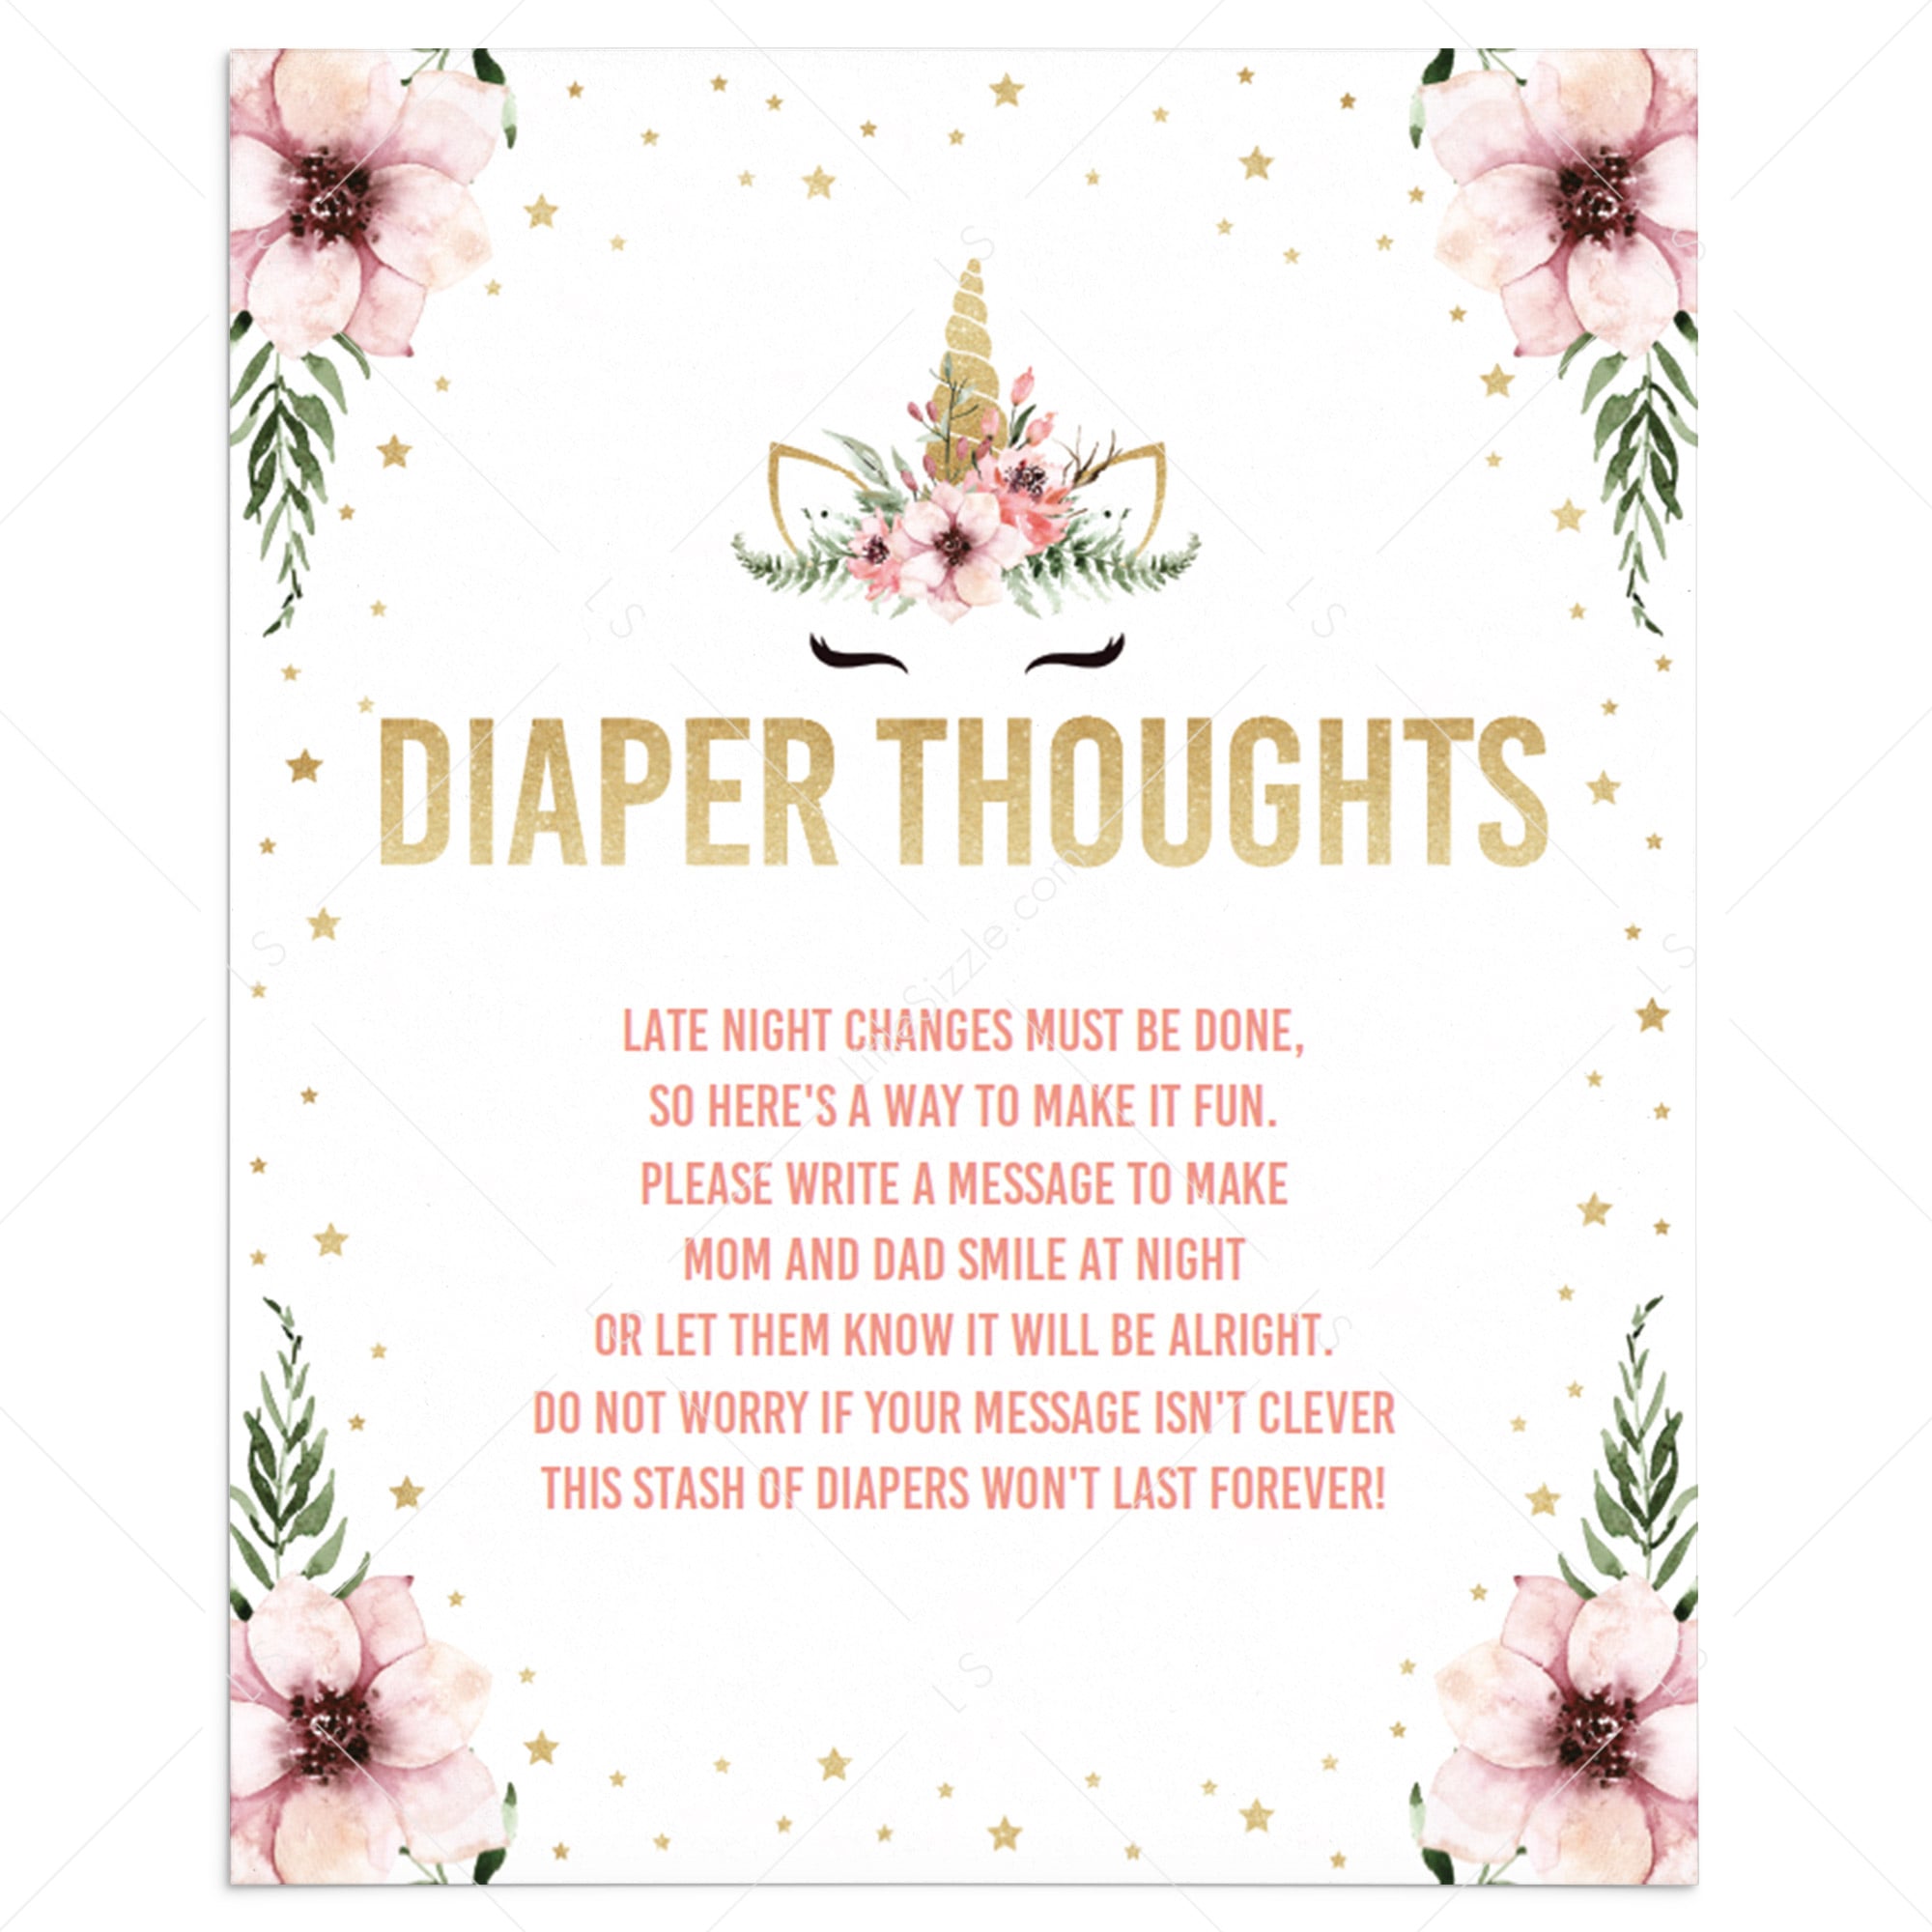 Baby Shower Diaper Thoughts Sign Template Floral Unicorn by LittleSizzle